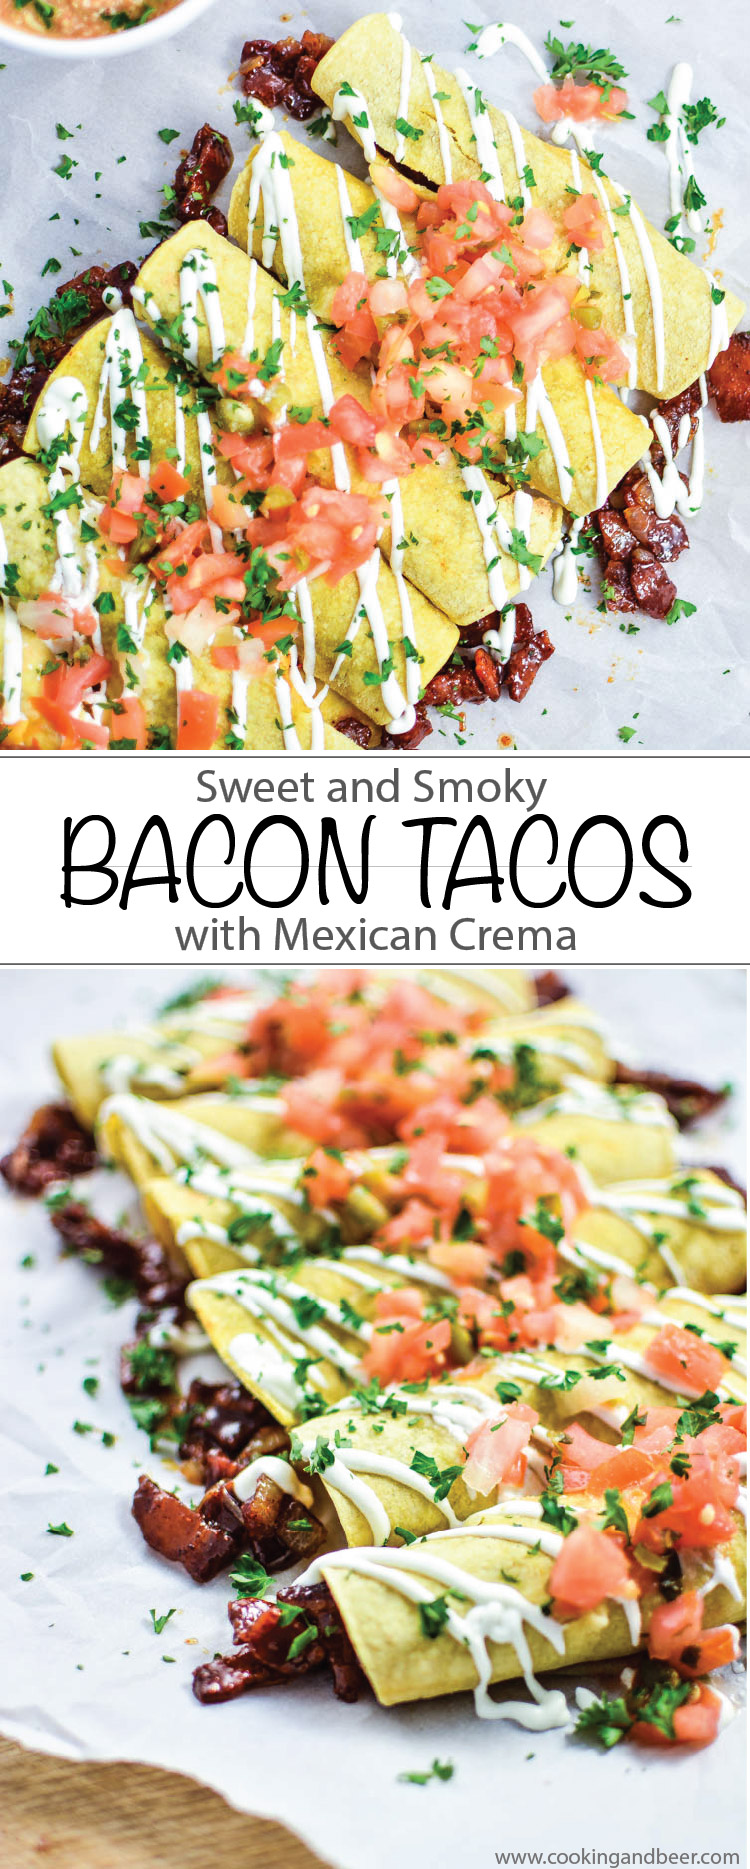 Sweet and Smoky Bacon Tacos with Mexican Crema are gluten free and ready in minutes making it the perfect lunch or weeknight dinner! | www.cookingandbeer.com